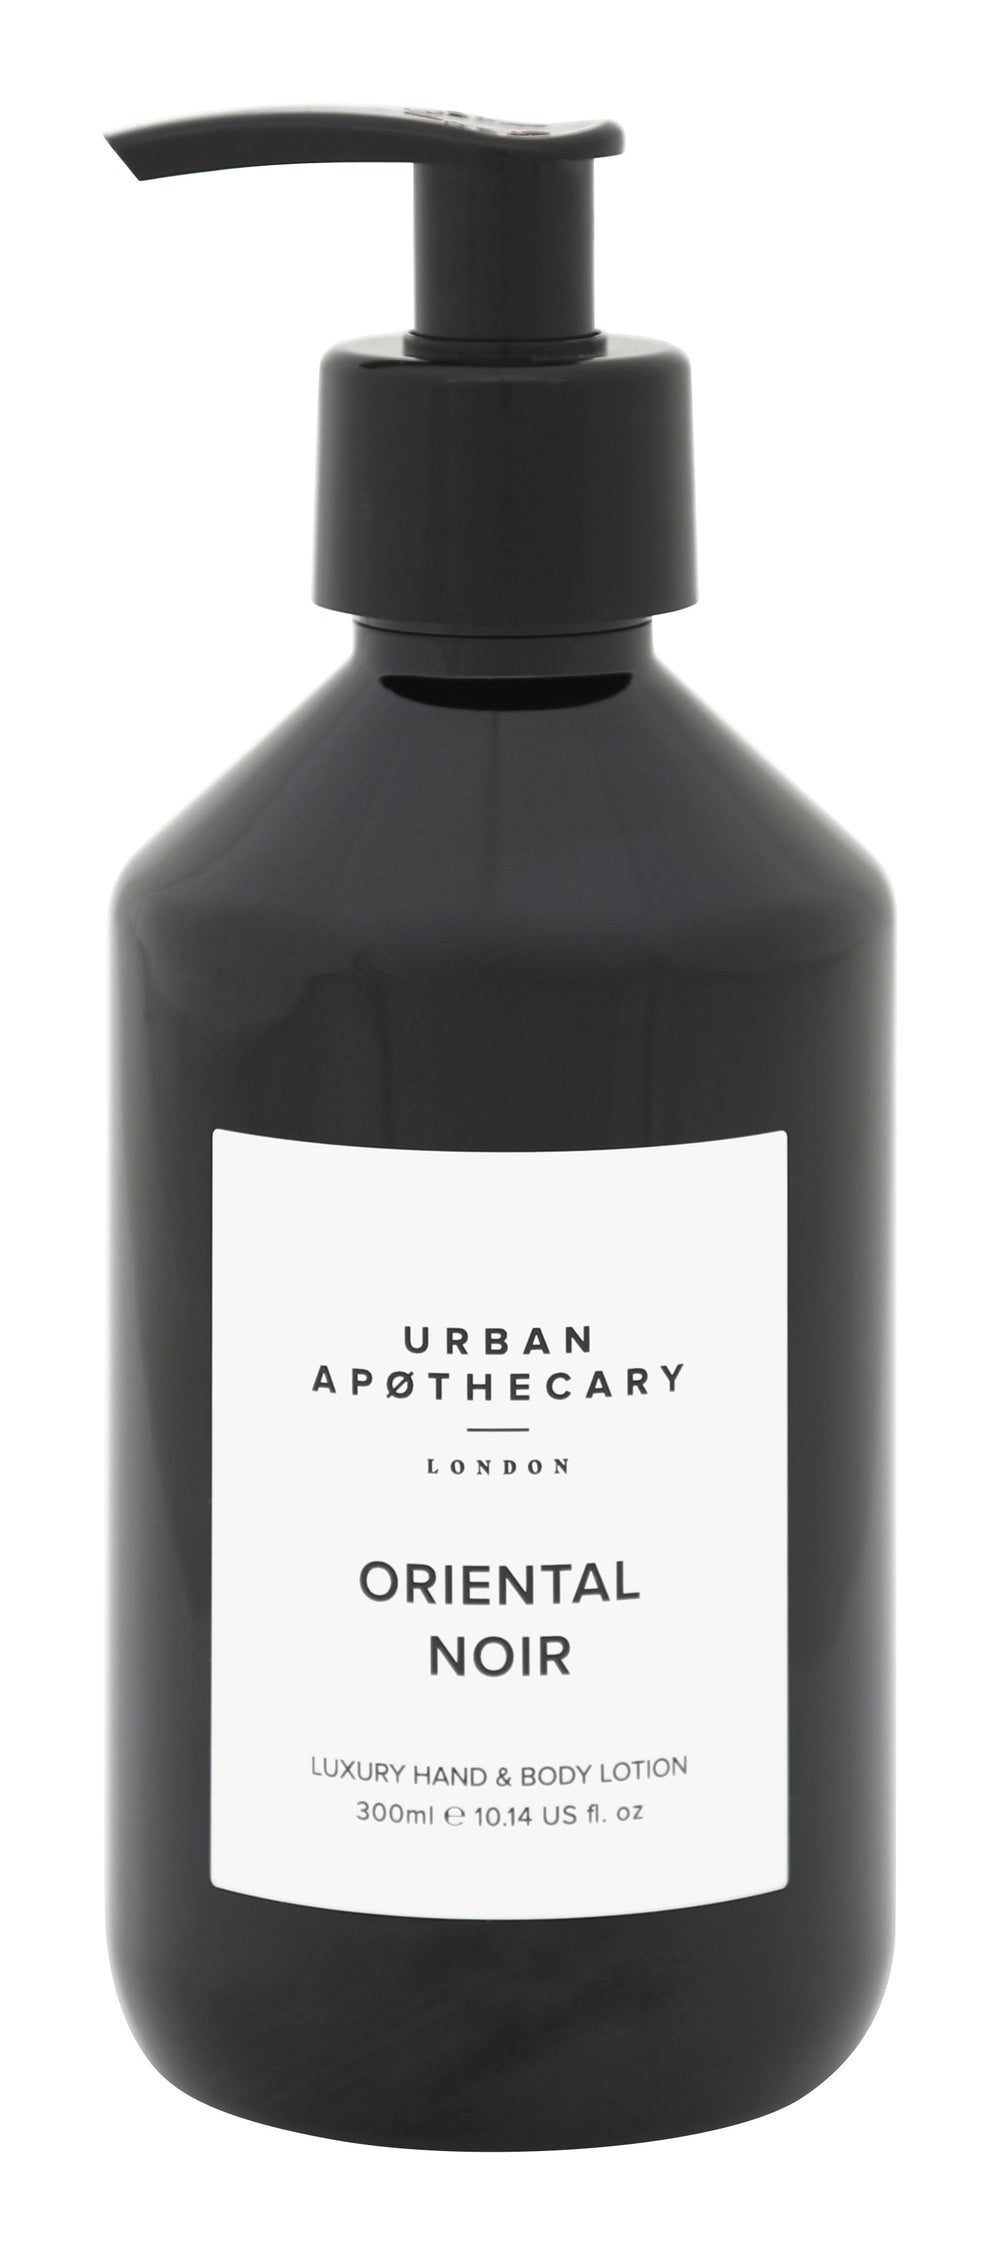 Urban Apothecary Hand & Body Lotions